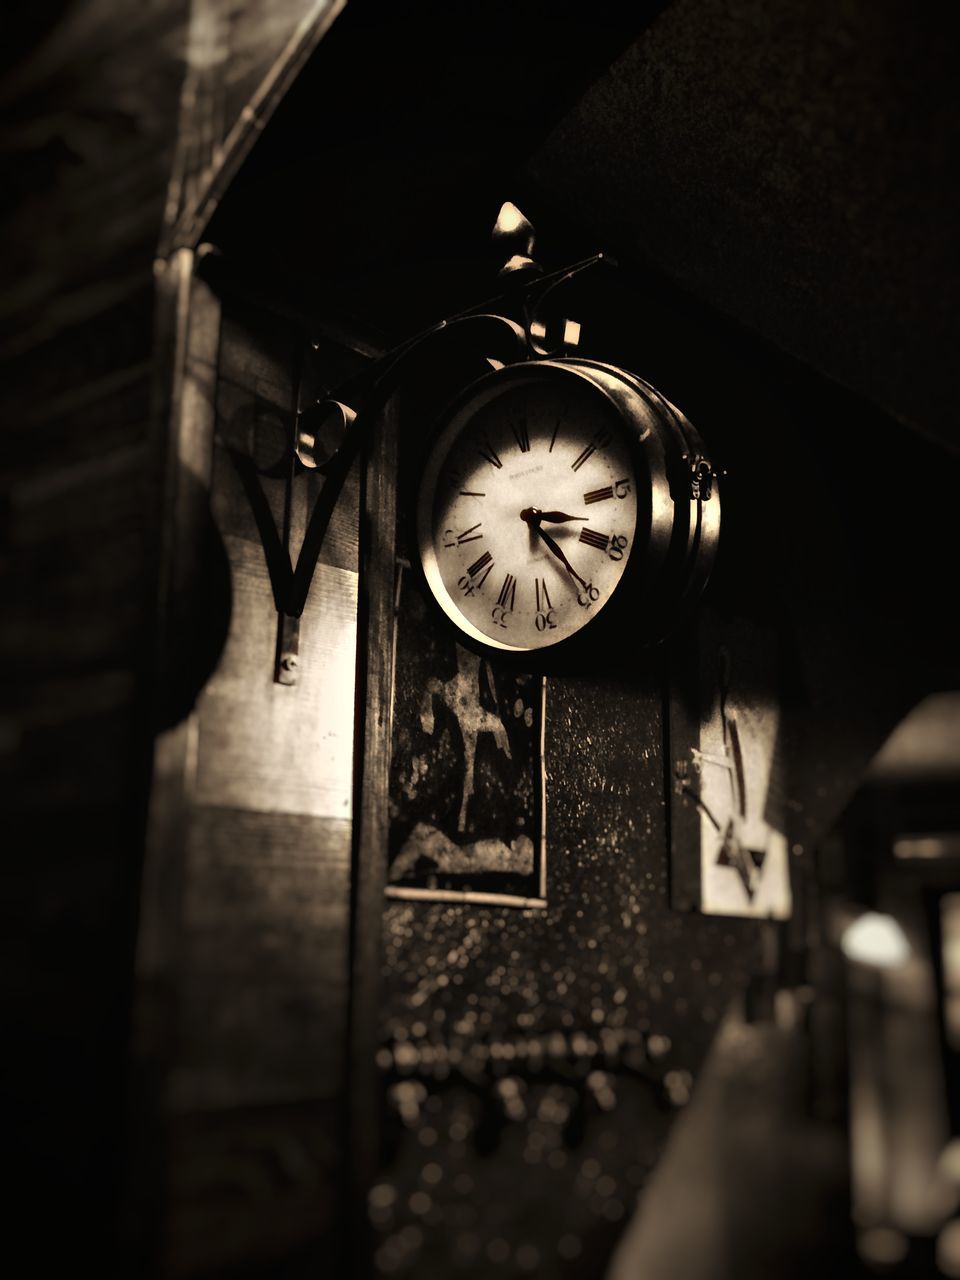 clock, time, indoors, old-fashioned, low angle view, no people, clock face, hanging, close-up, day, roman numeral, hour hand, minute hand